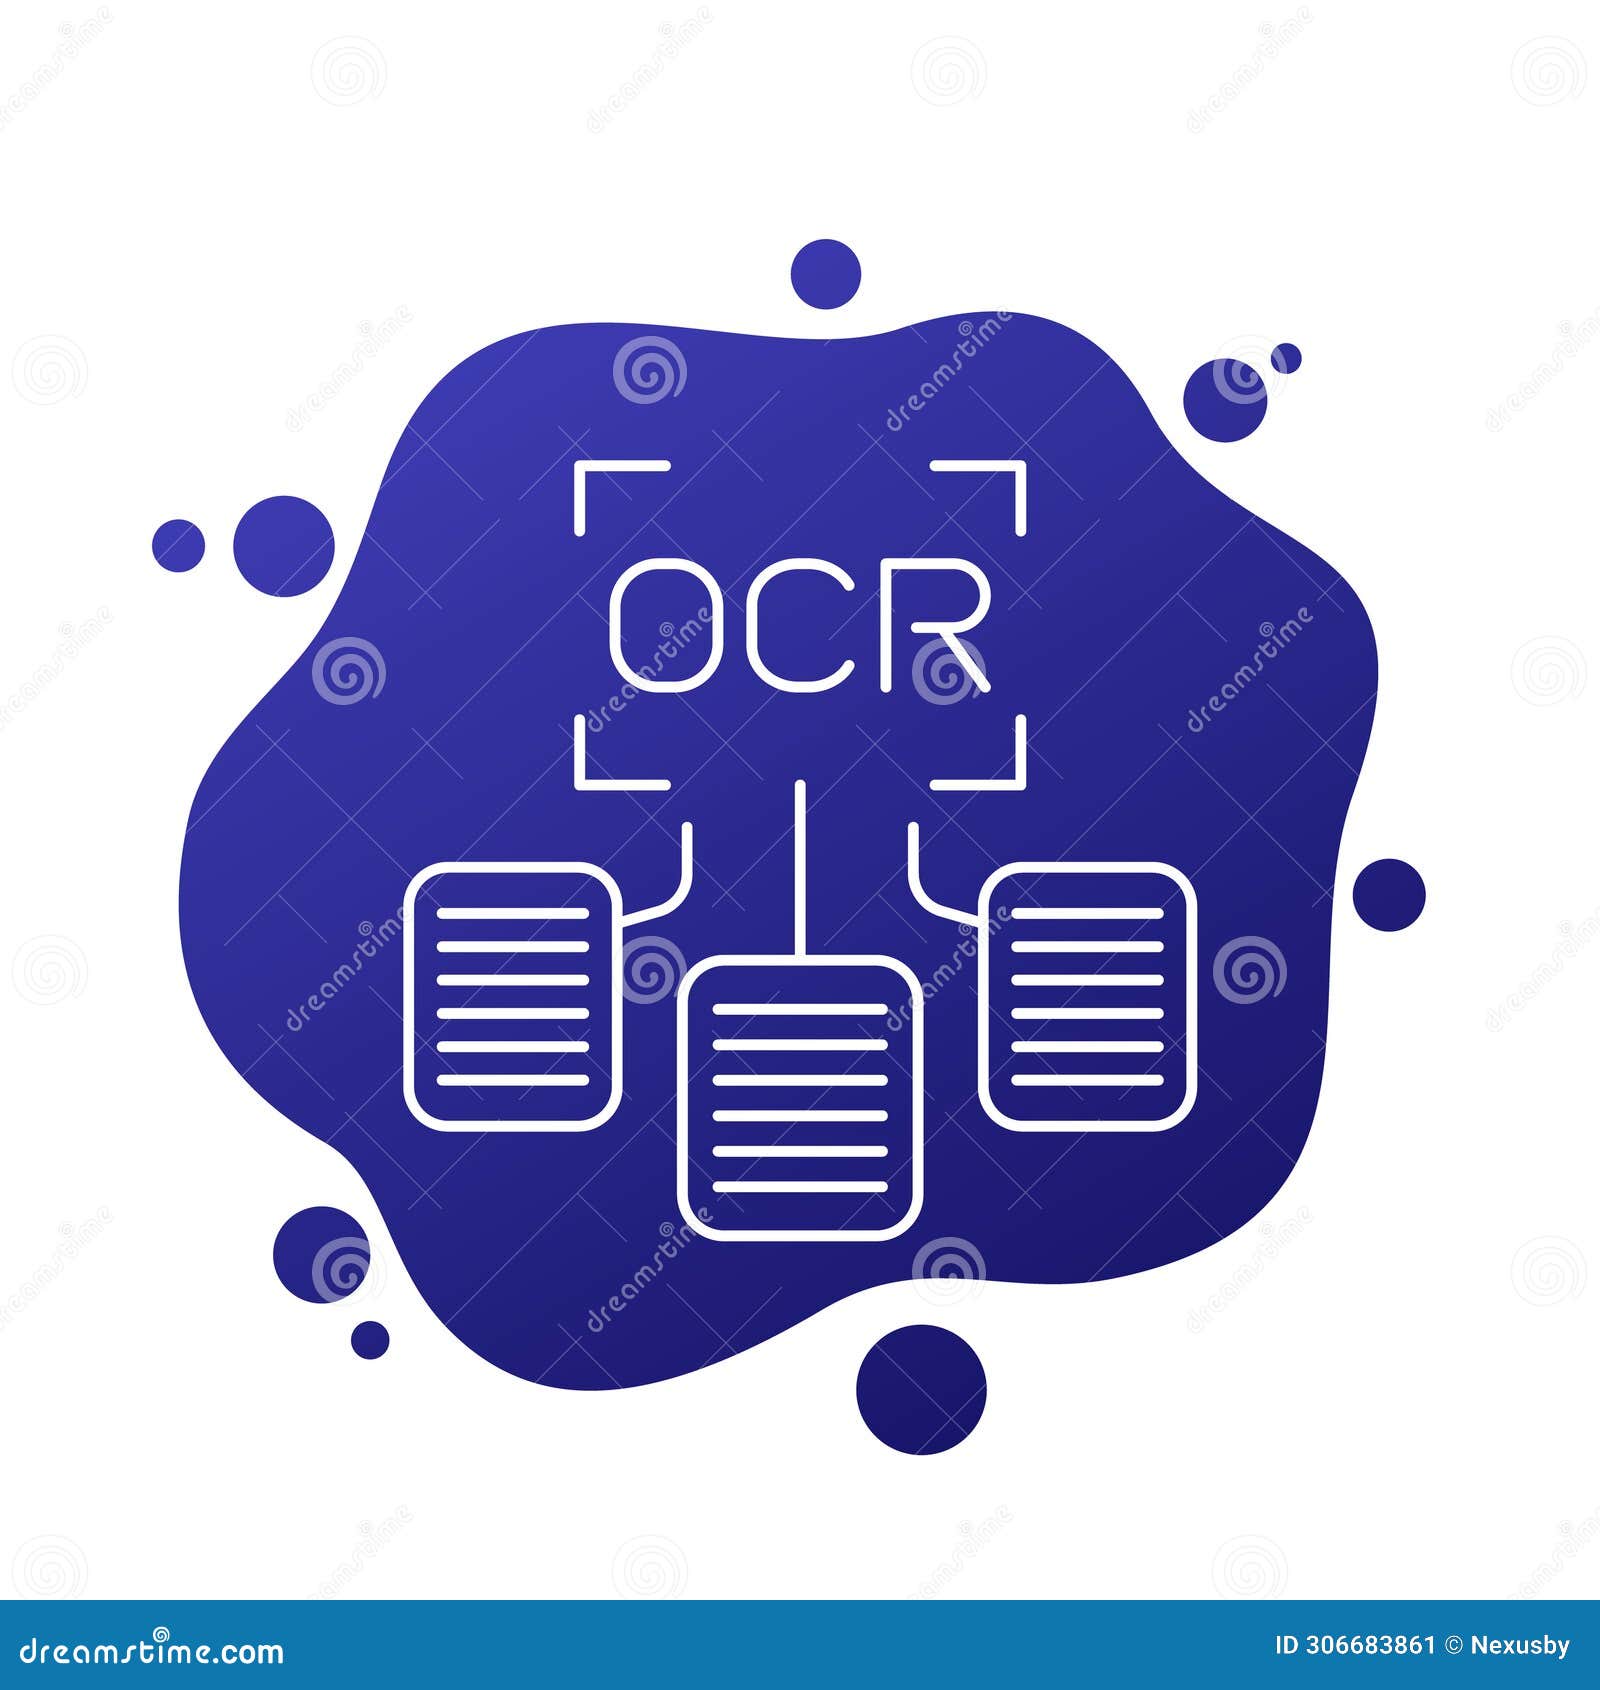 ocr line icon, optical character recognition